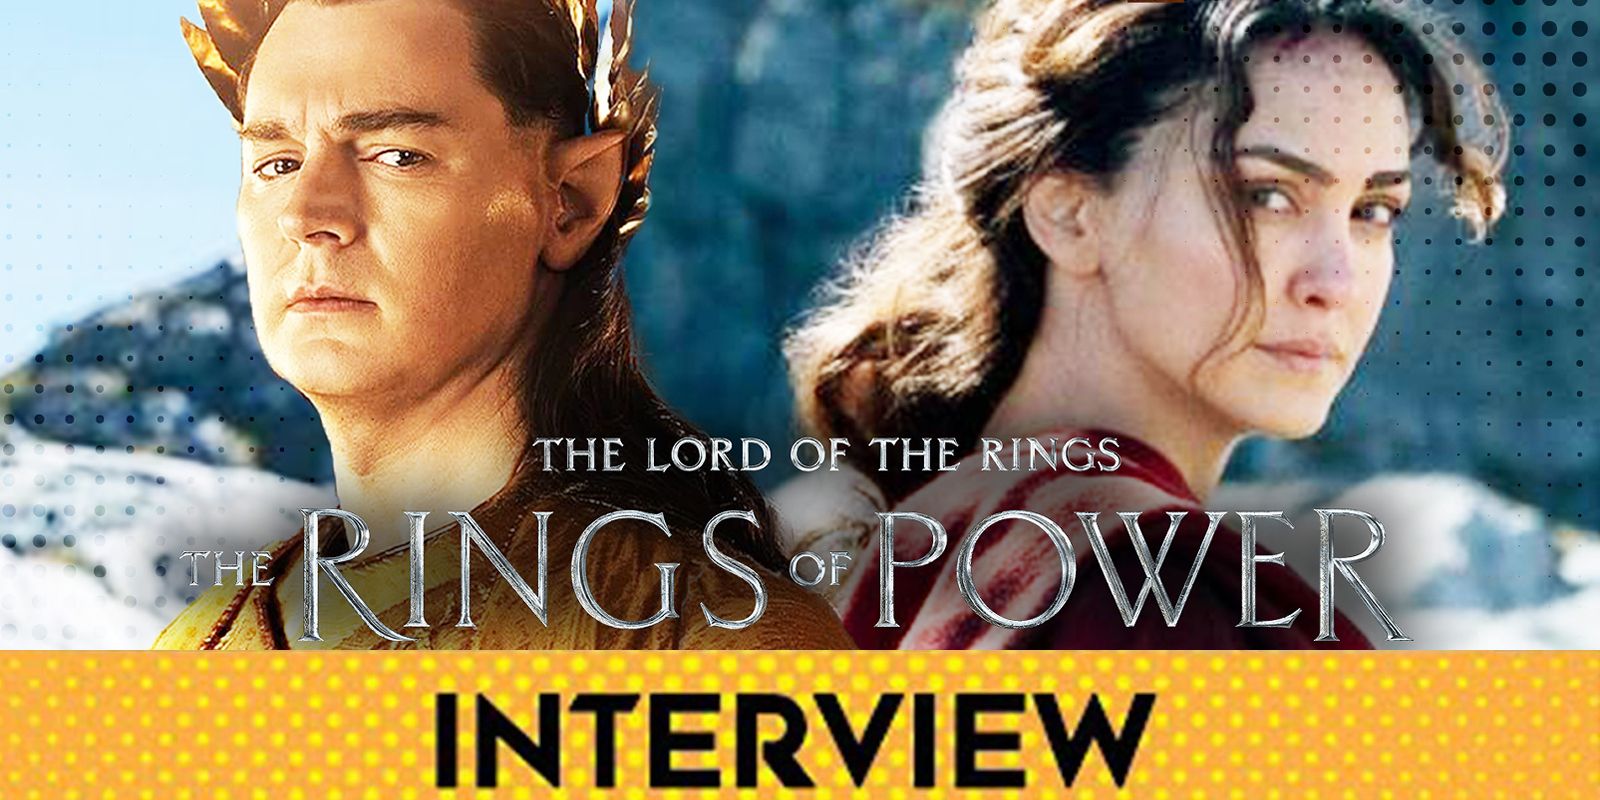 The Lord of the Rings: The Rings of Power' - Cast Interview